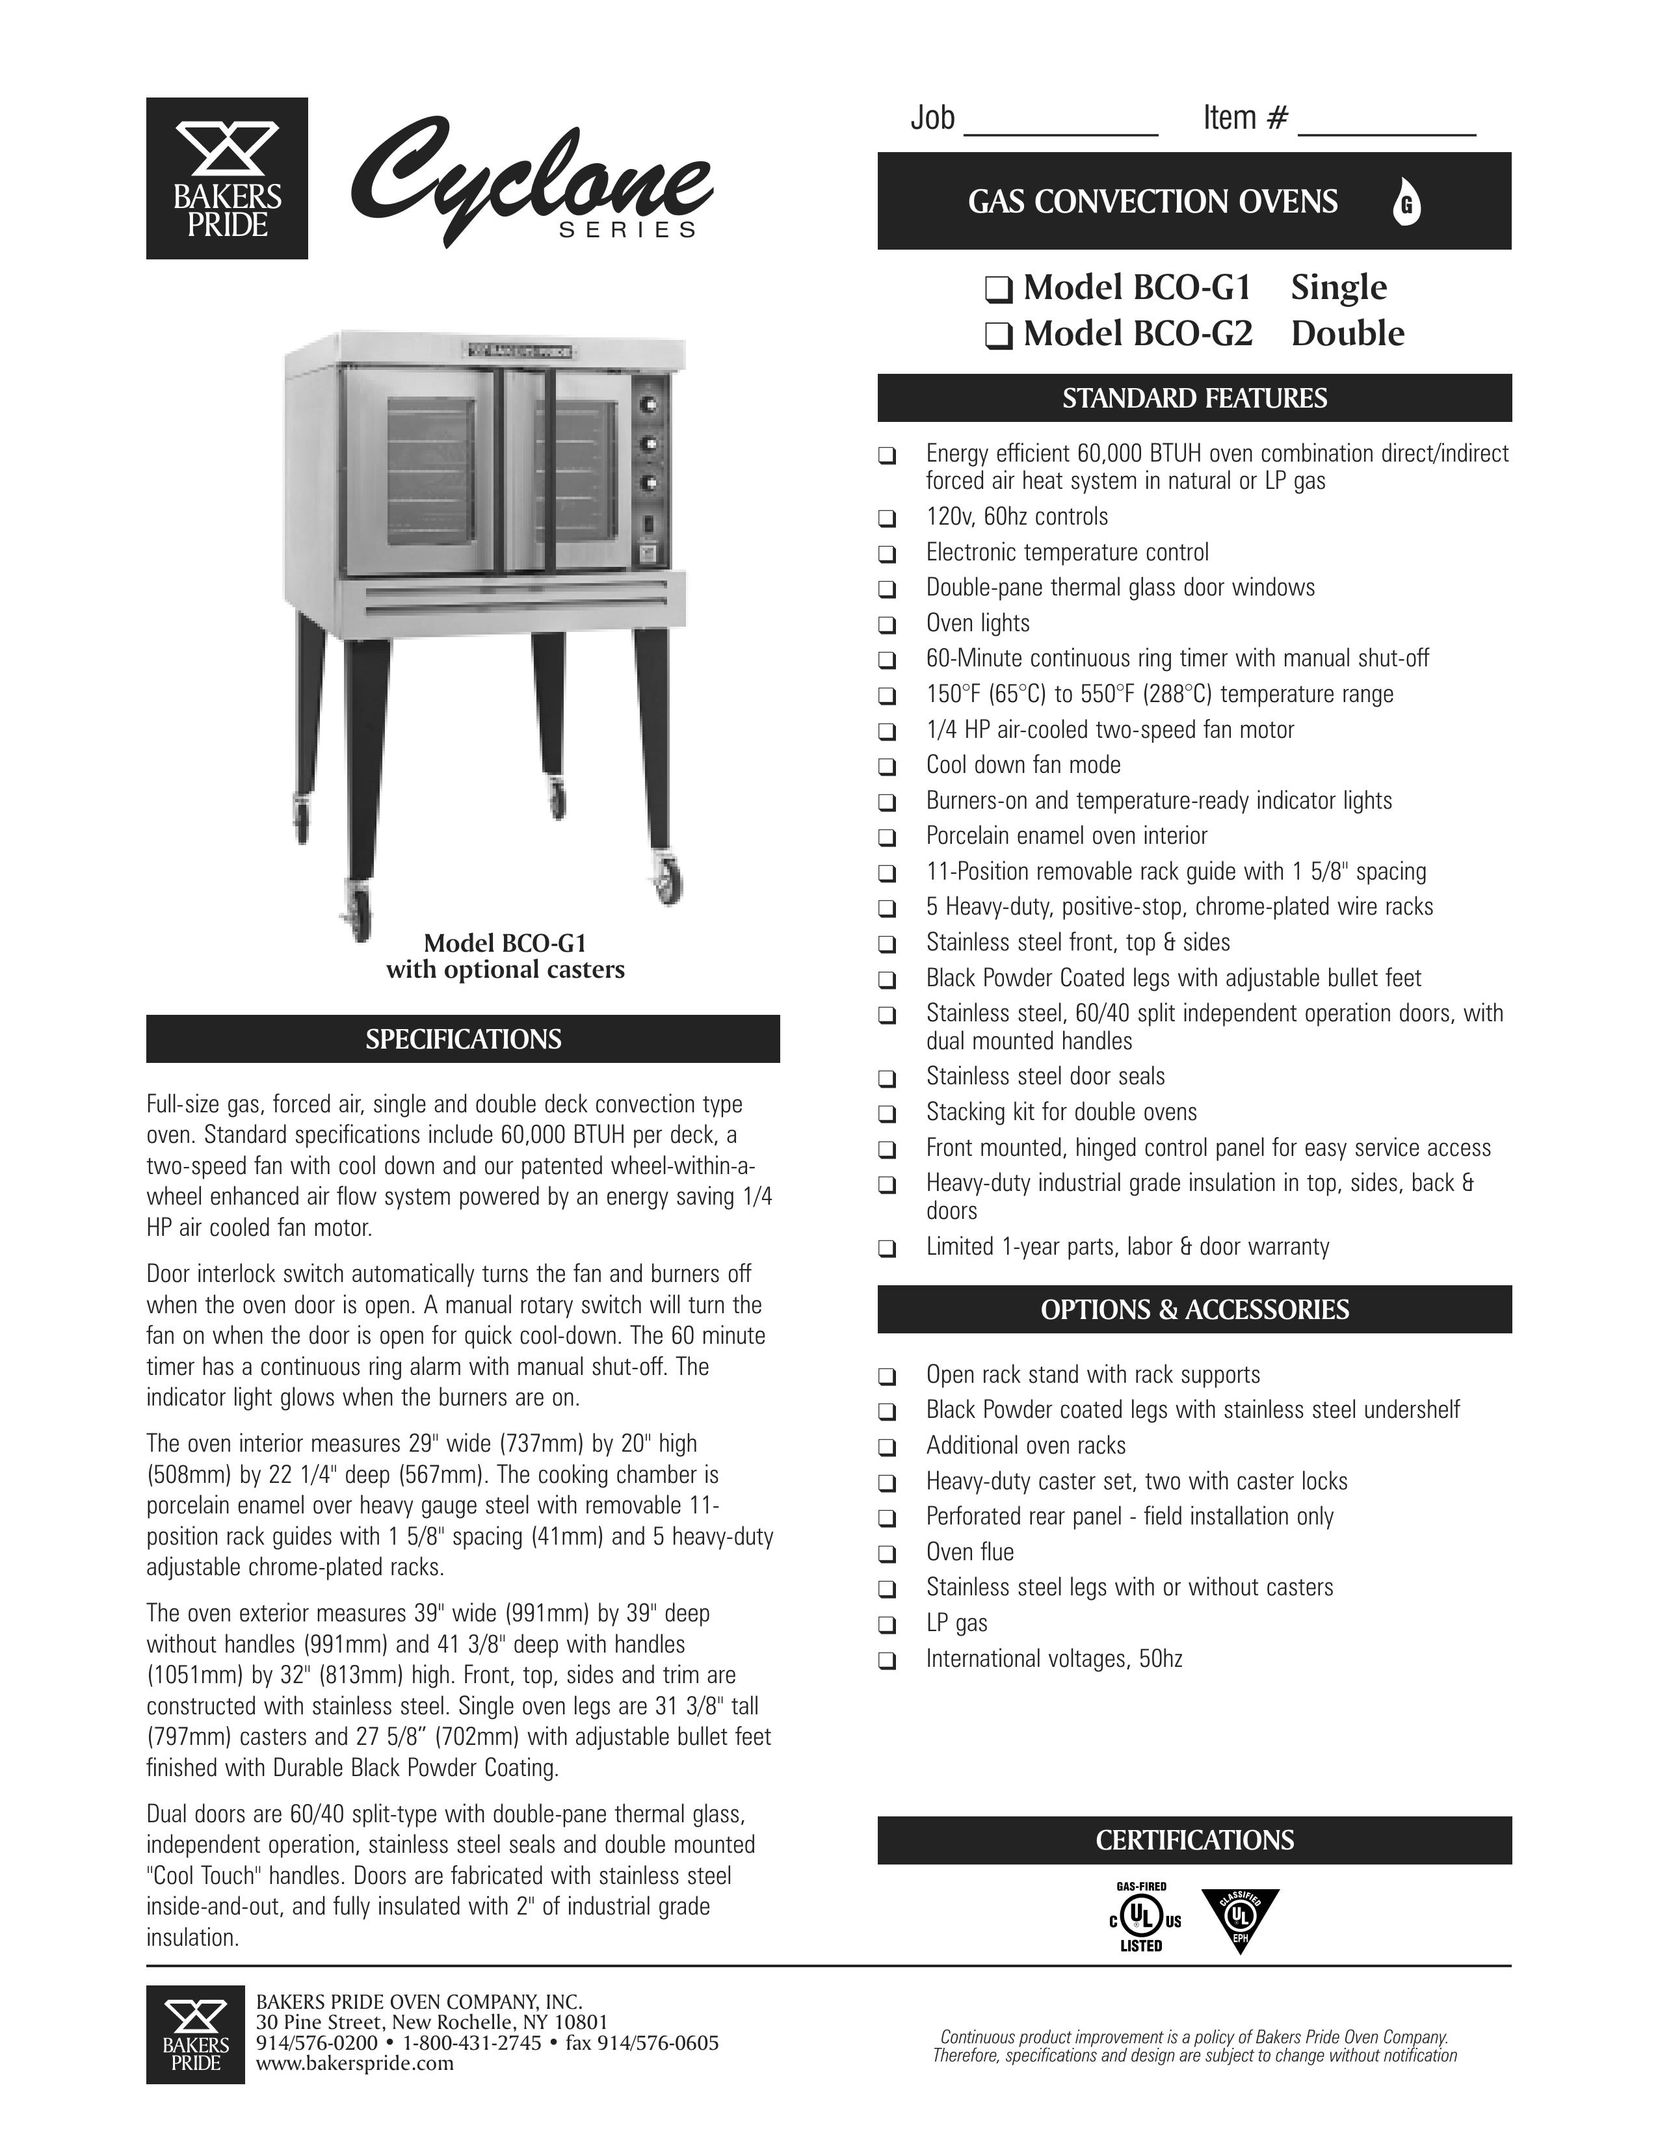 Bakers Pride Oven BCO-G1 Convection Oven User Manual